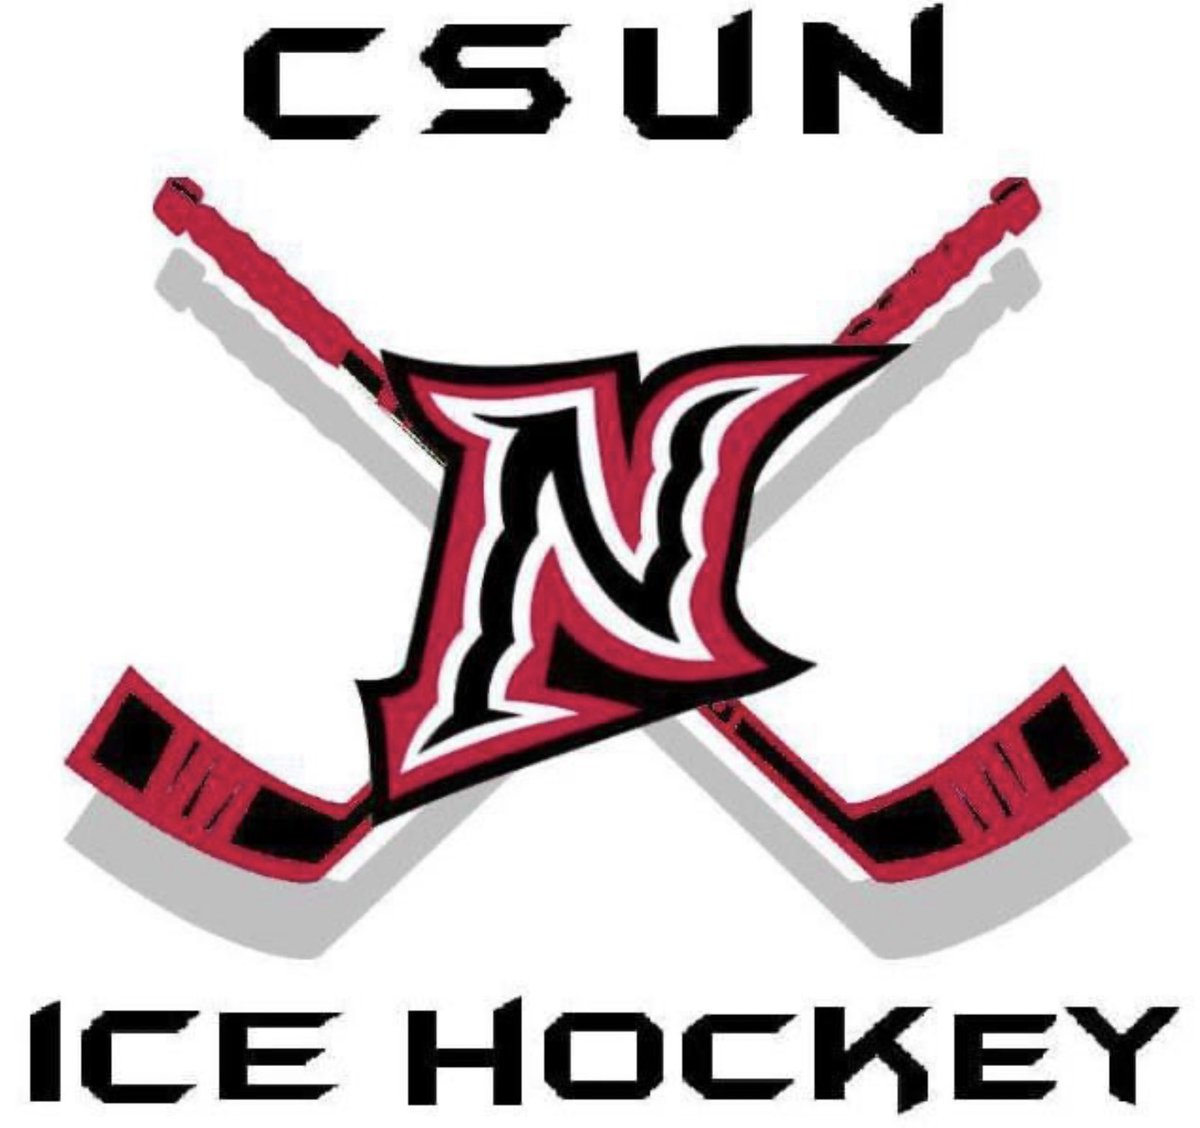 In an effort to increase awareness of upcoming games and events for alums, we’ve created a private CSUN Ice Hockey alumni Instagram page - csunicehockeyalumni . 

If you’d also like to receive updates via email, DM me your name and email address.

#csunicehockey  #matadorfamily